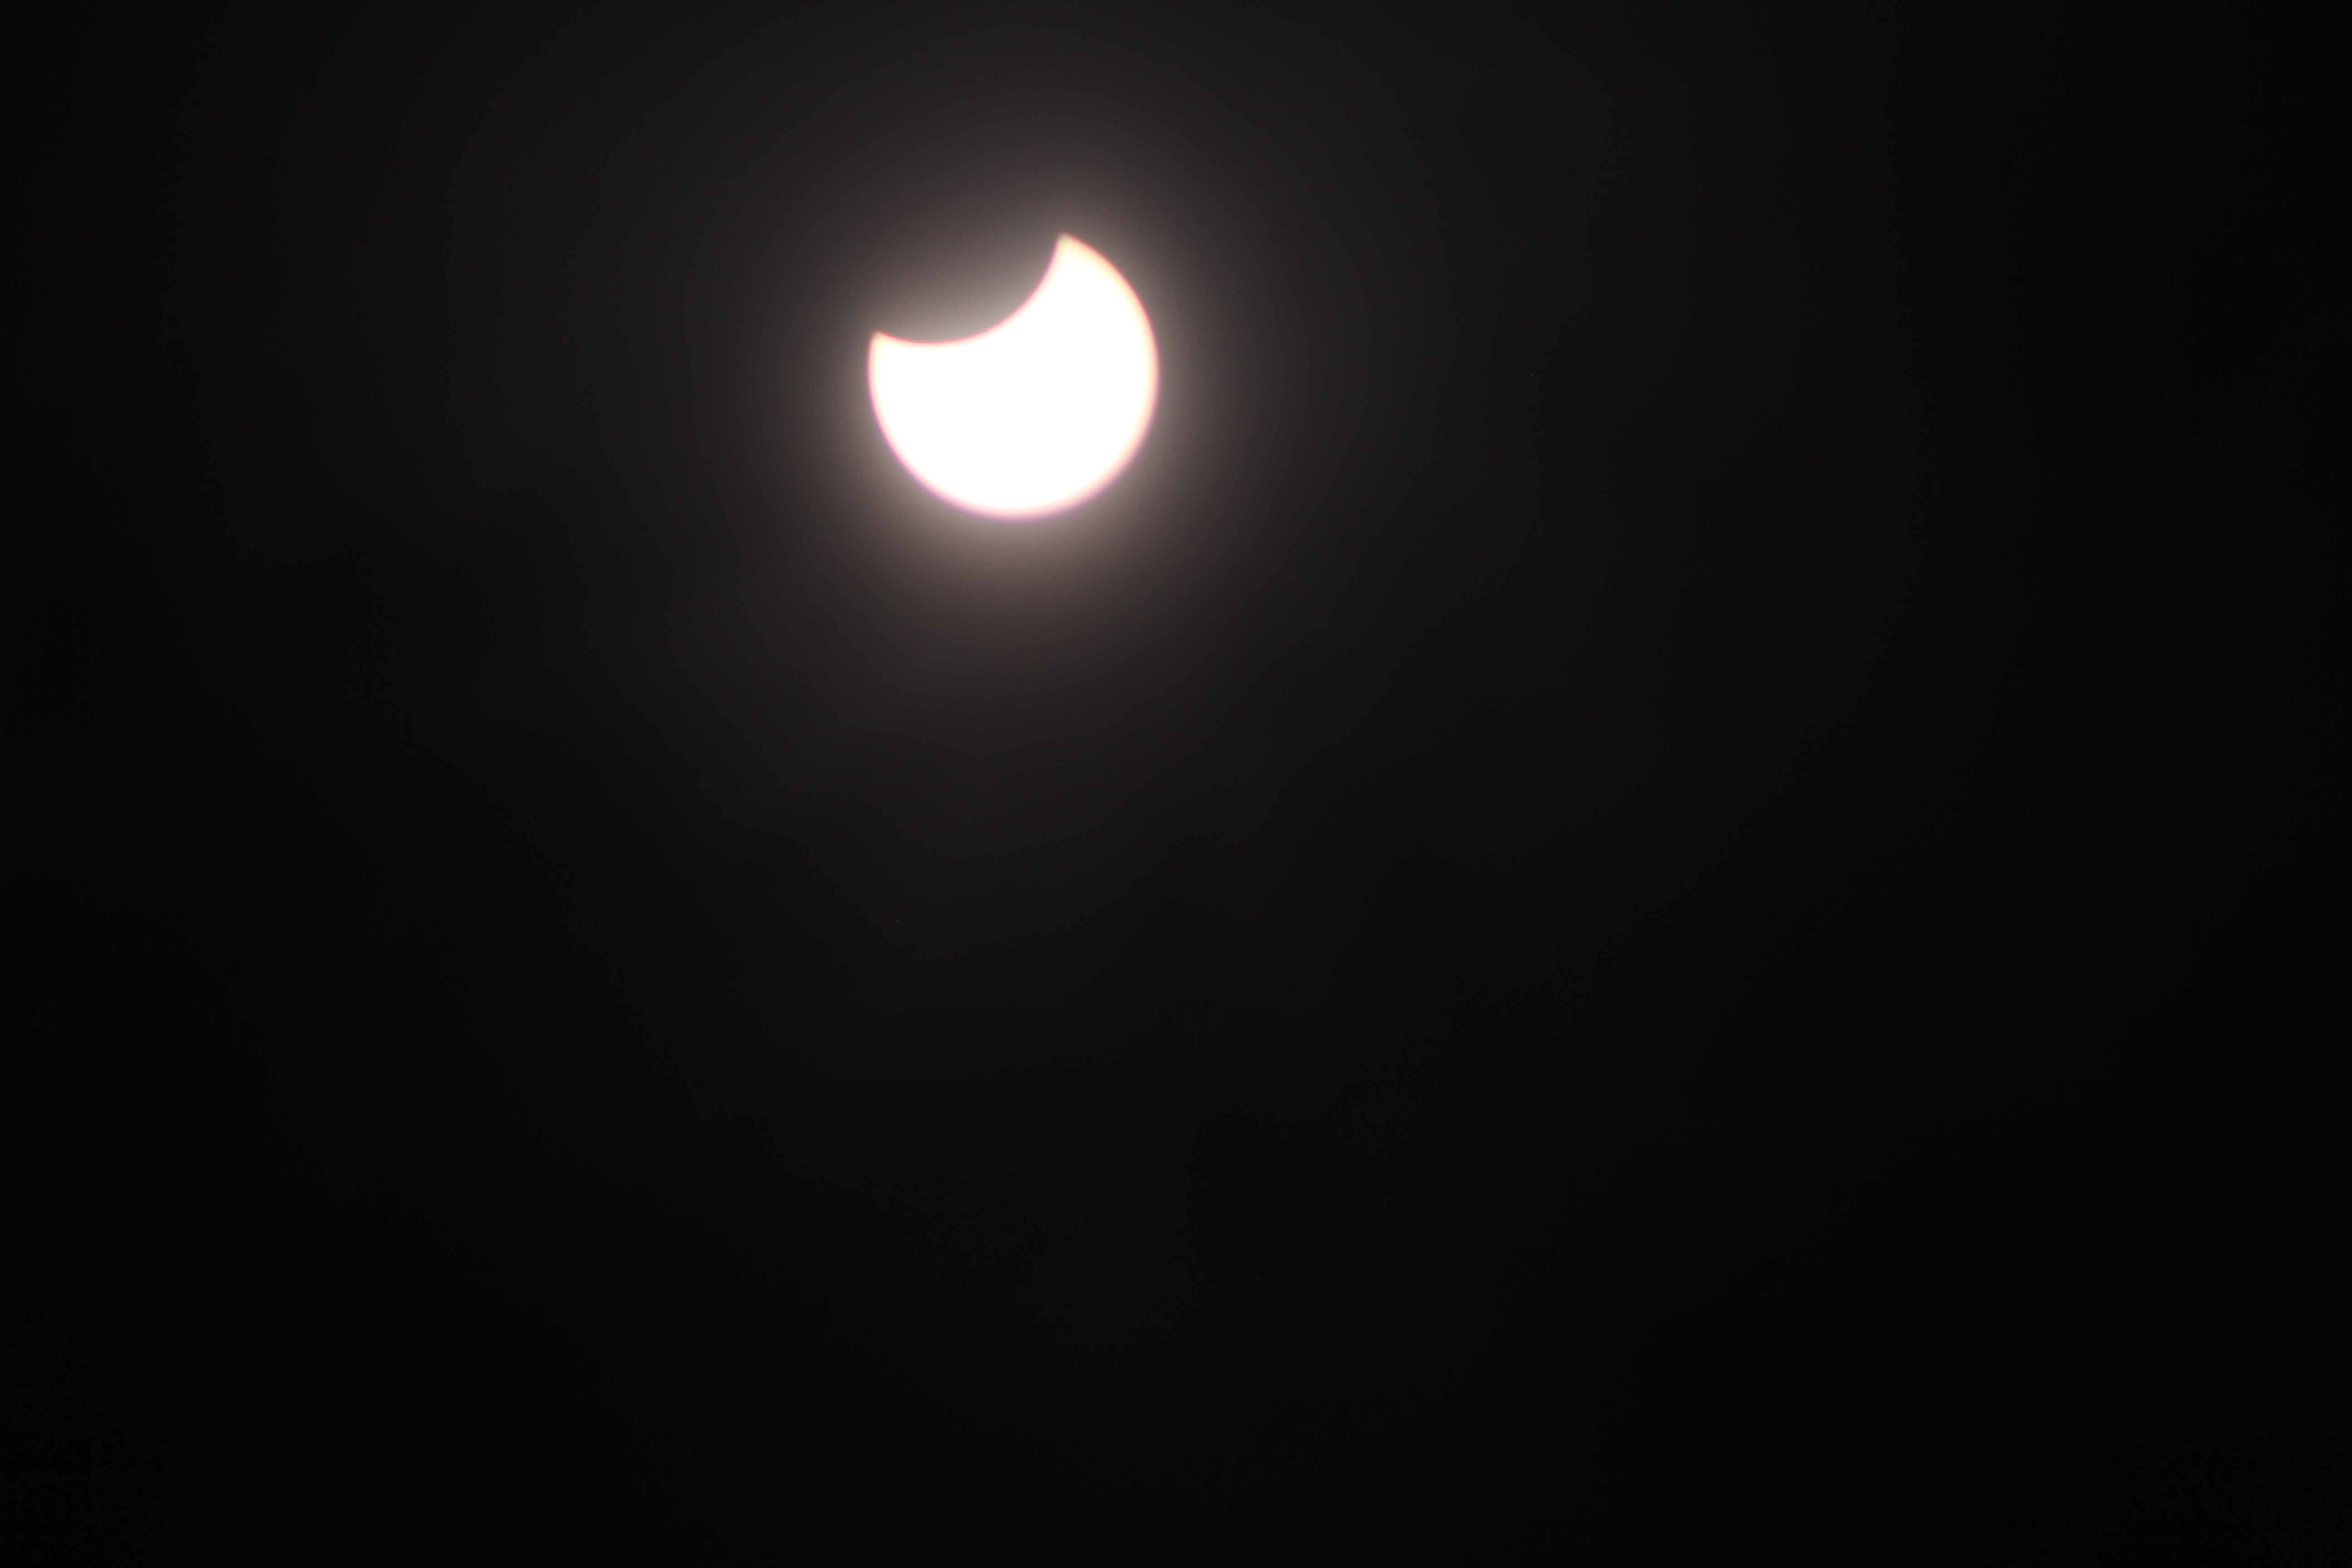 Colin's final partial solar eclipse, thanks & well done